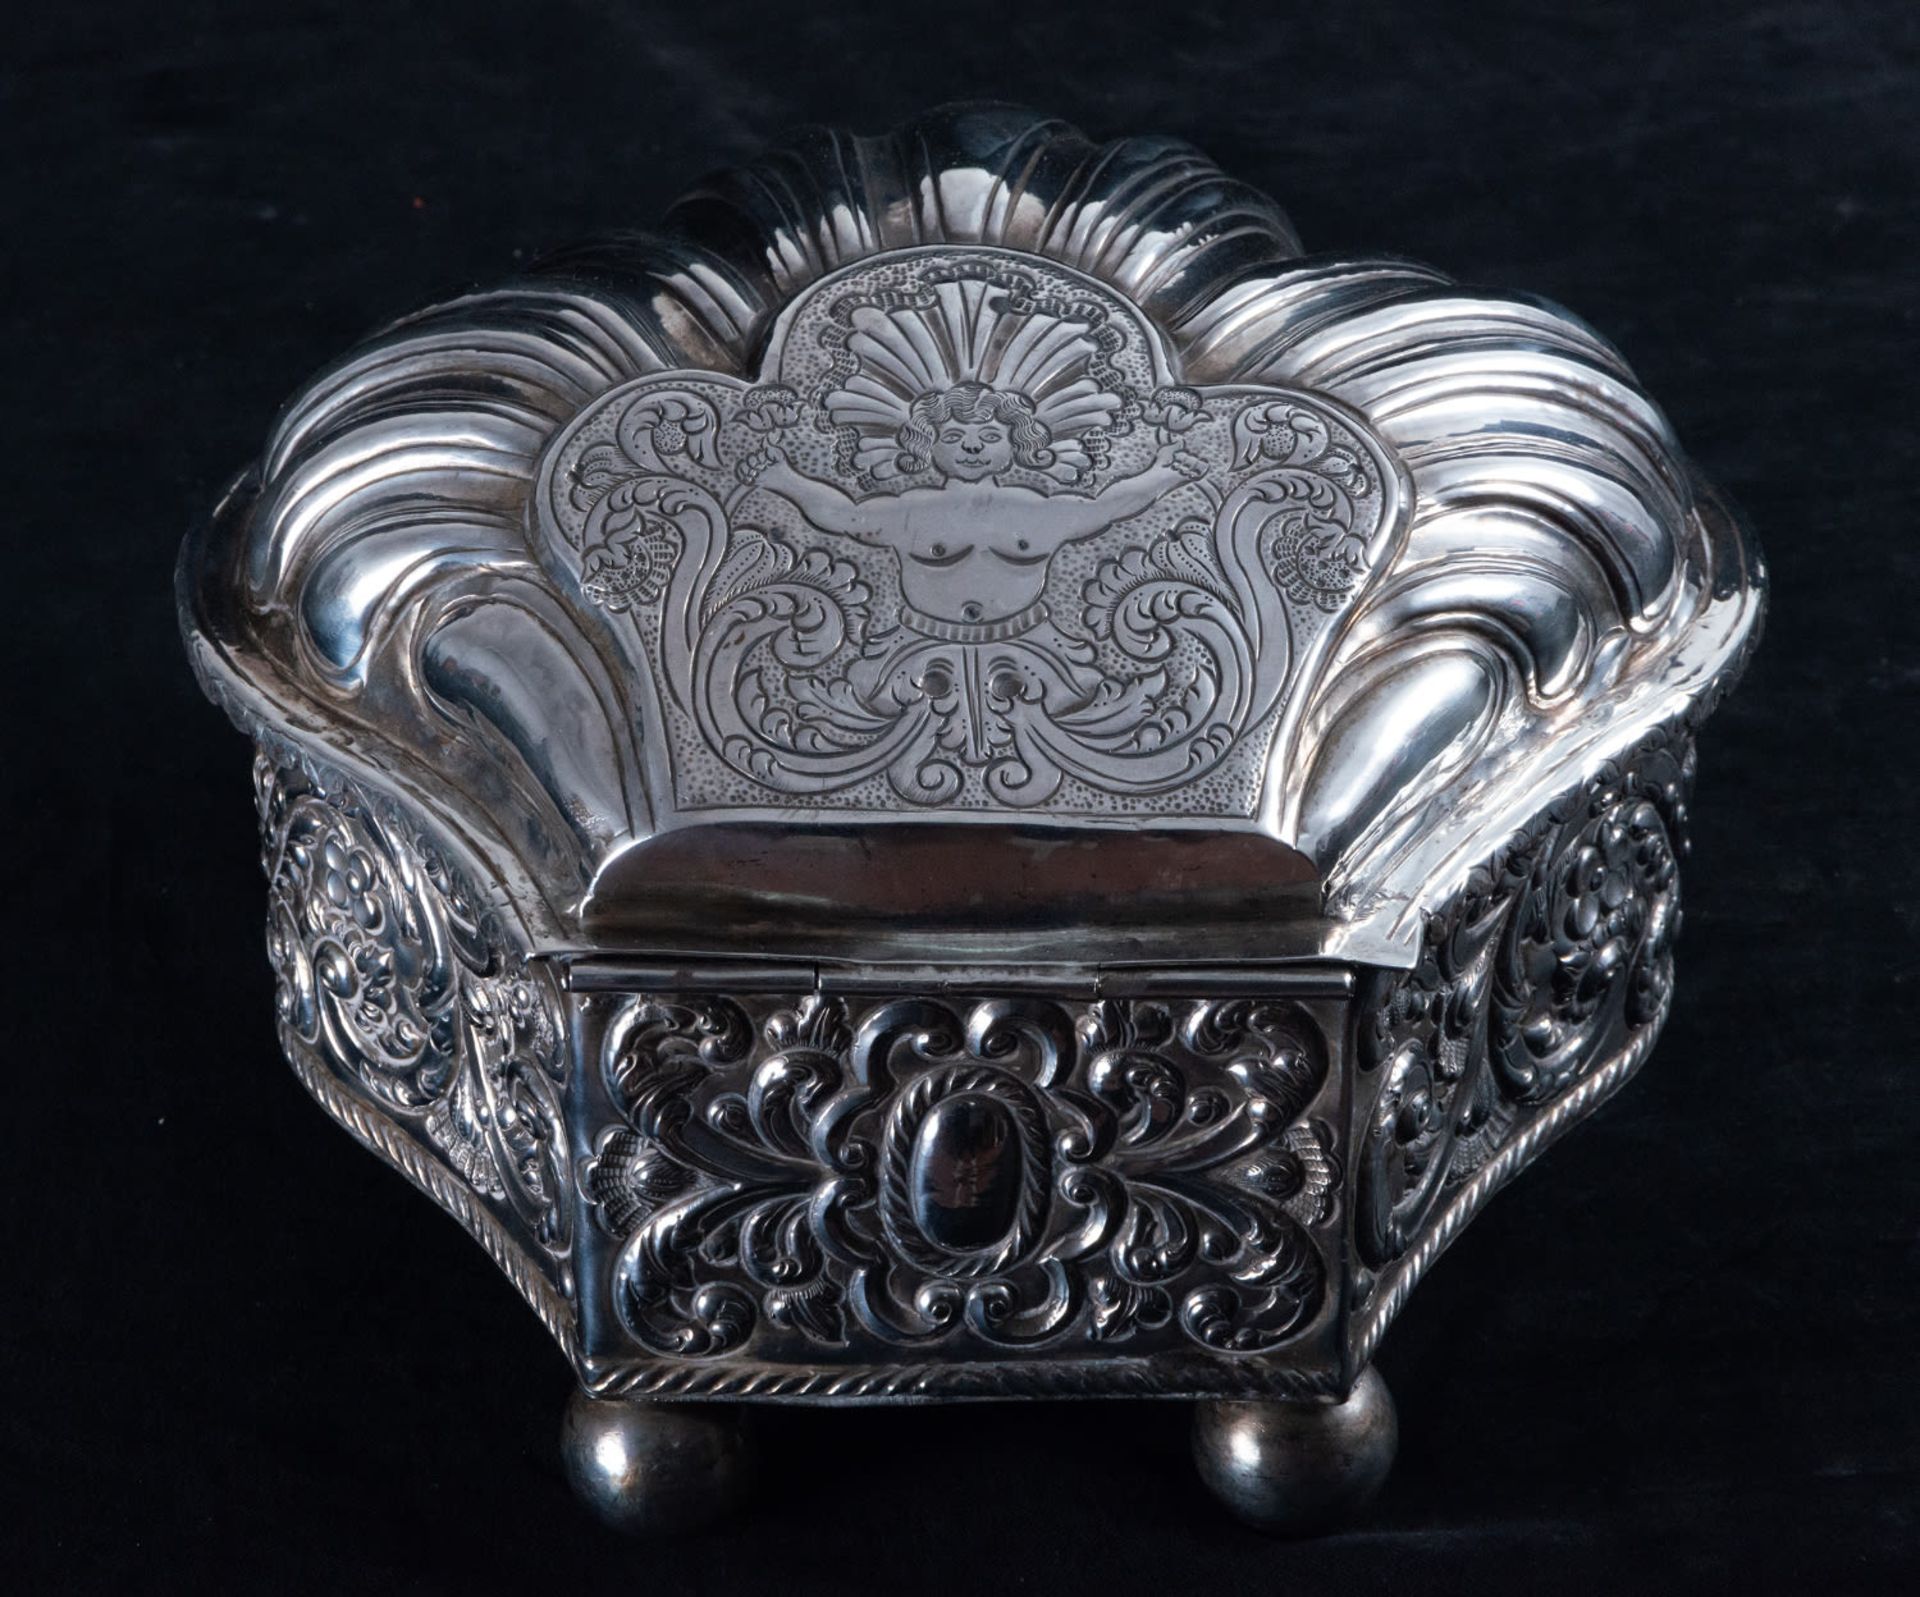 Exceptional Coquera in silver, colonial work, Cuzco, Peru, 18th century - Image 7 of 8